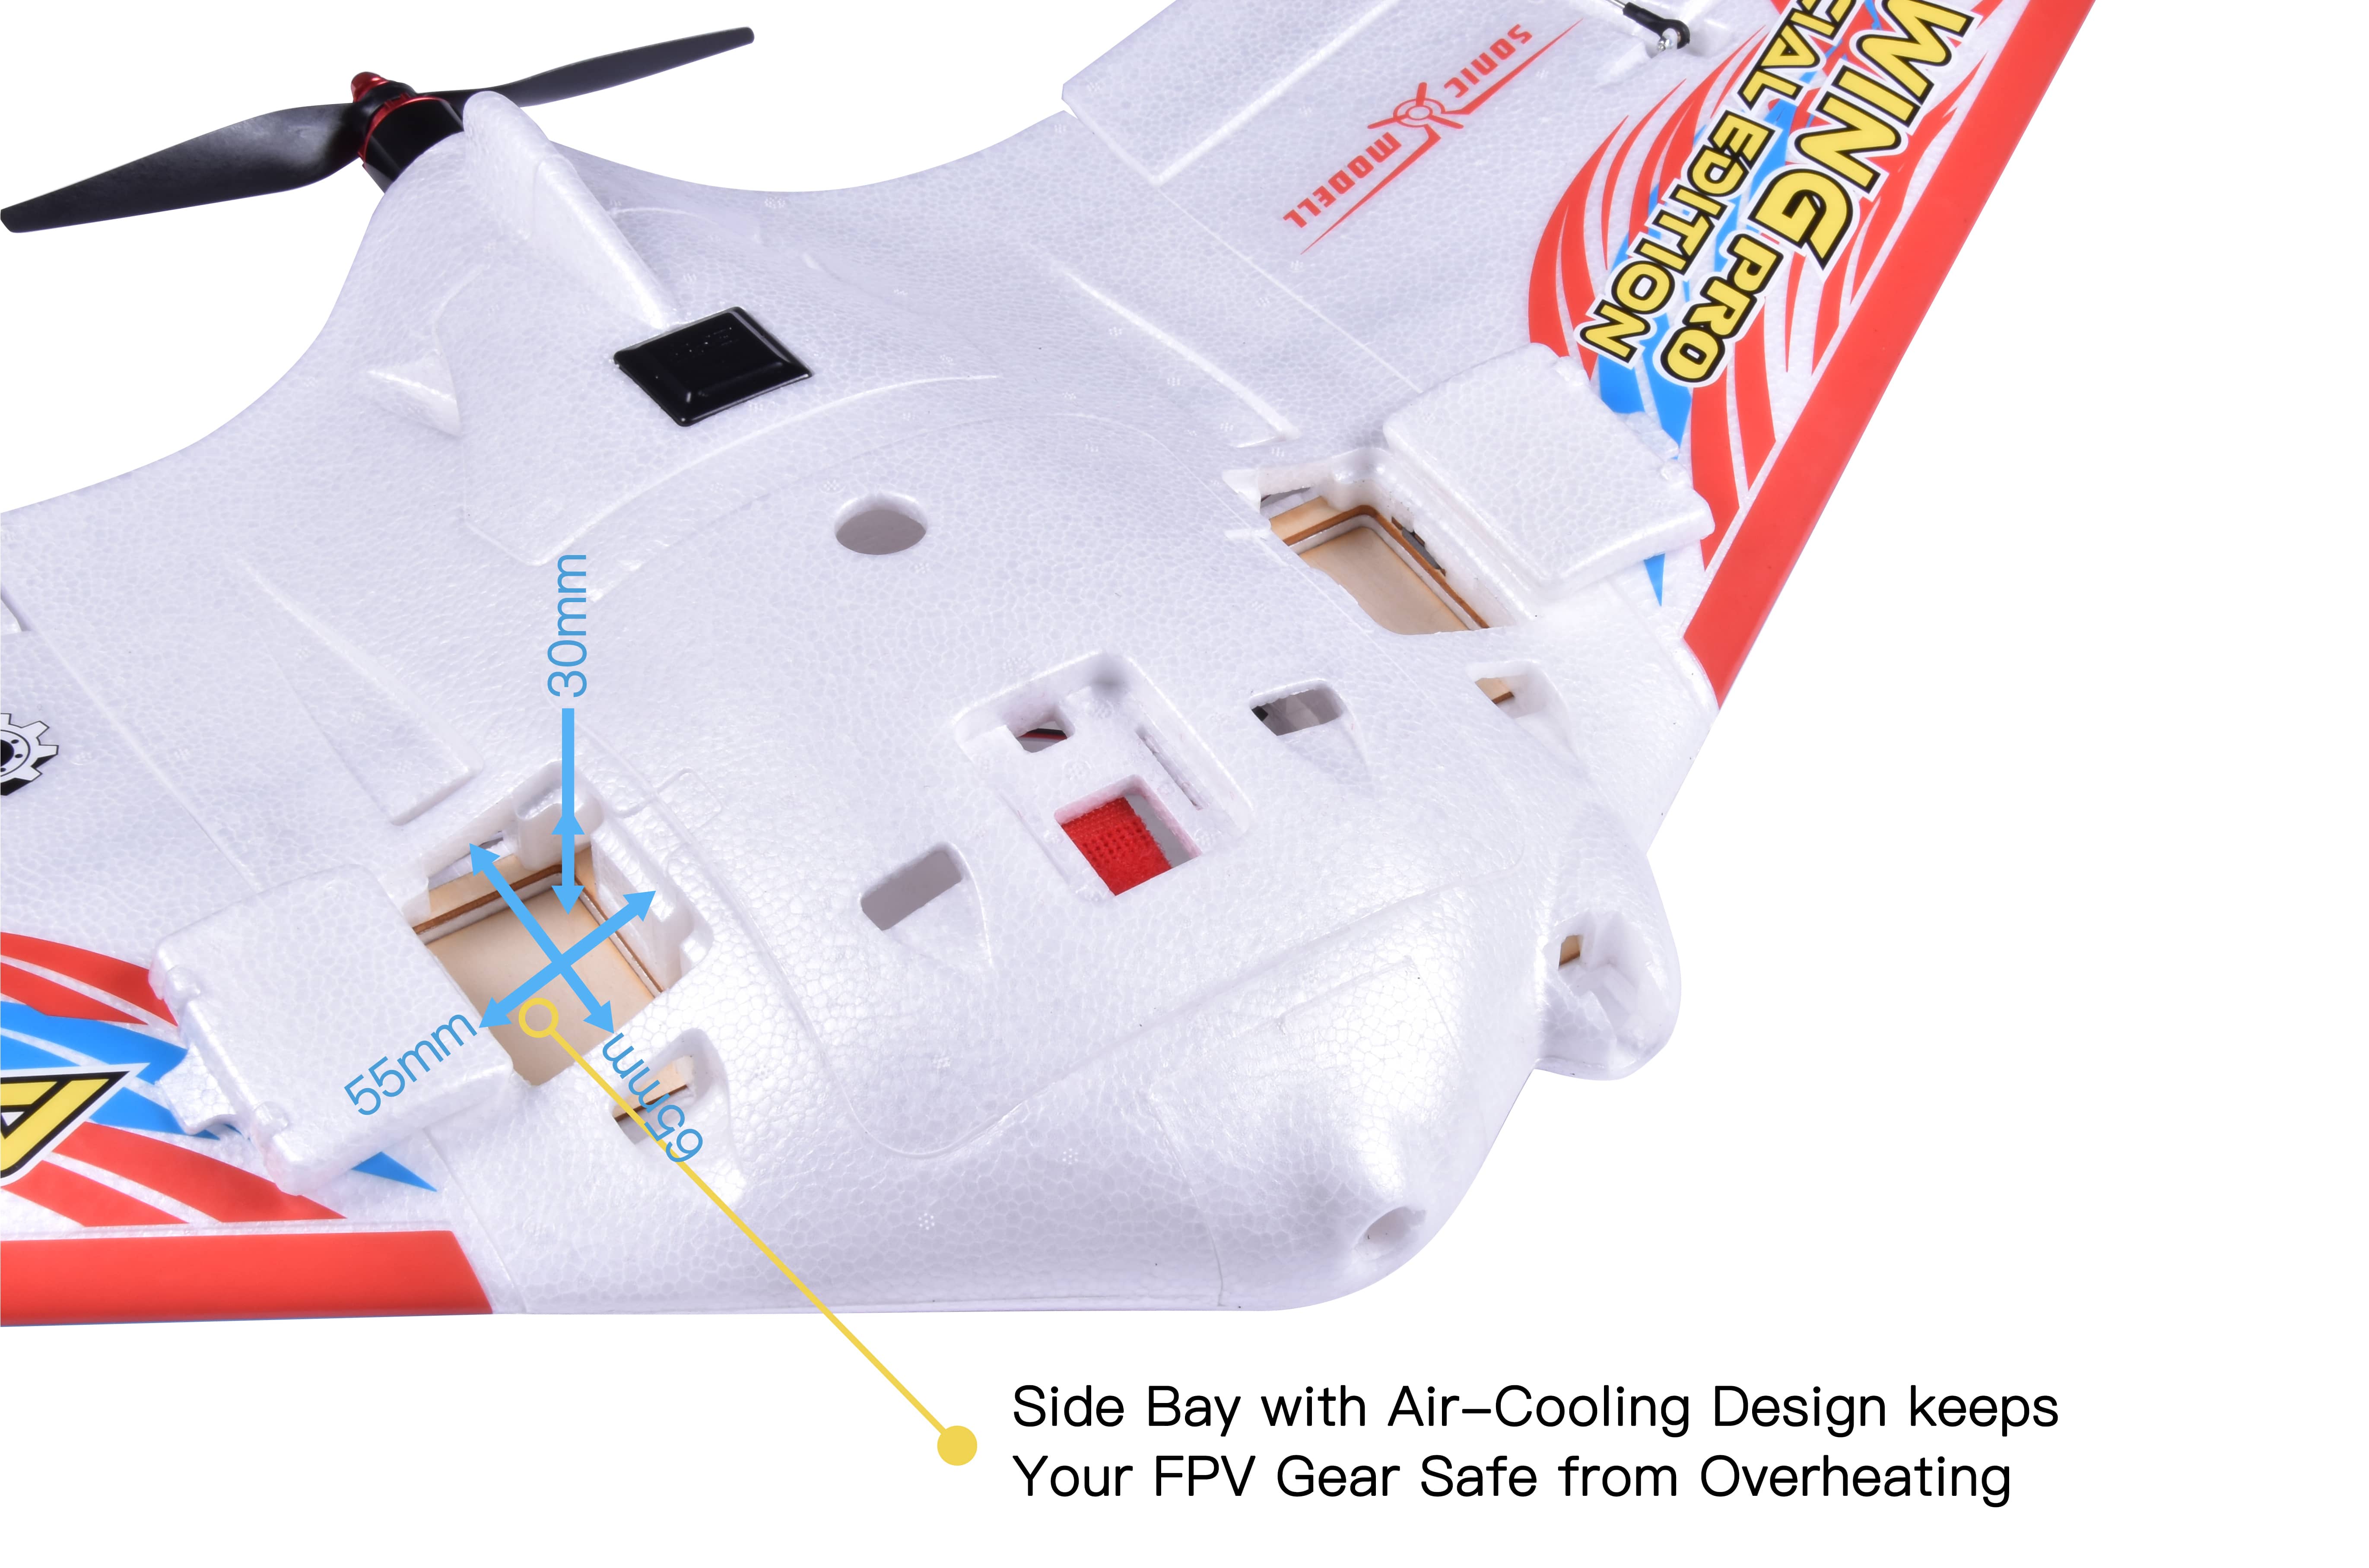 Eachine--Sonicmodell-AR-Wing-Pro-Special-Edition-1000mm-Wingspan-EPP-FPV-Flying-Wing-RC-Airplane-KIT-1857256-13